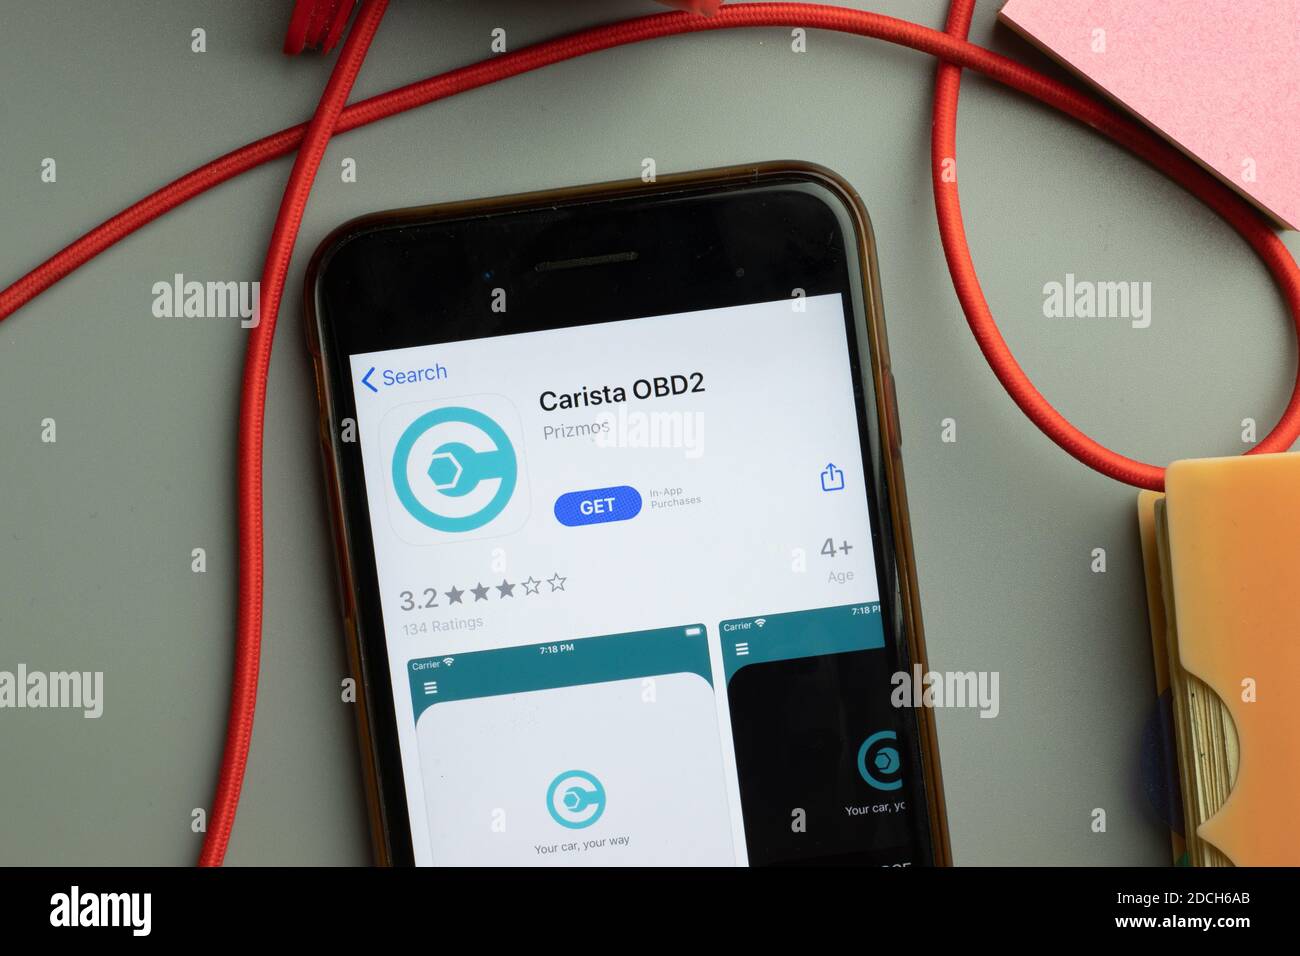 Carista OBD2 Android Download for Free - LD SPACE